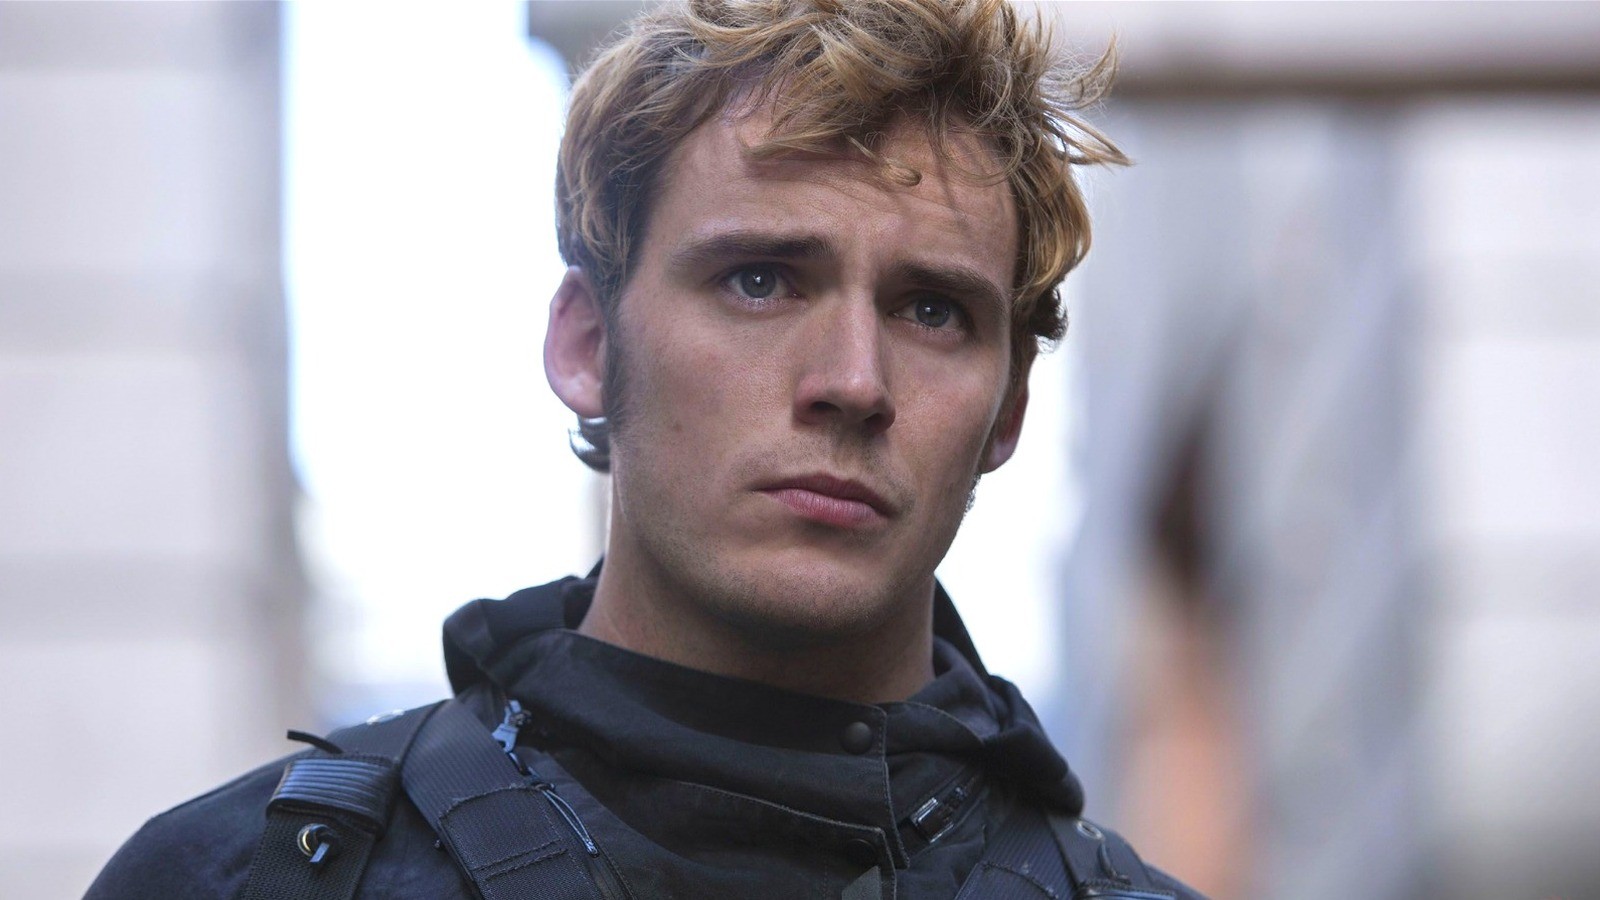 Sam Claflin in The Hunger Games: Catching Fire